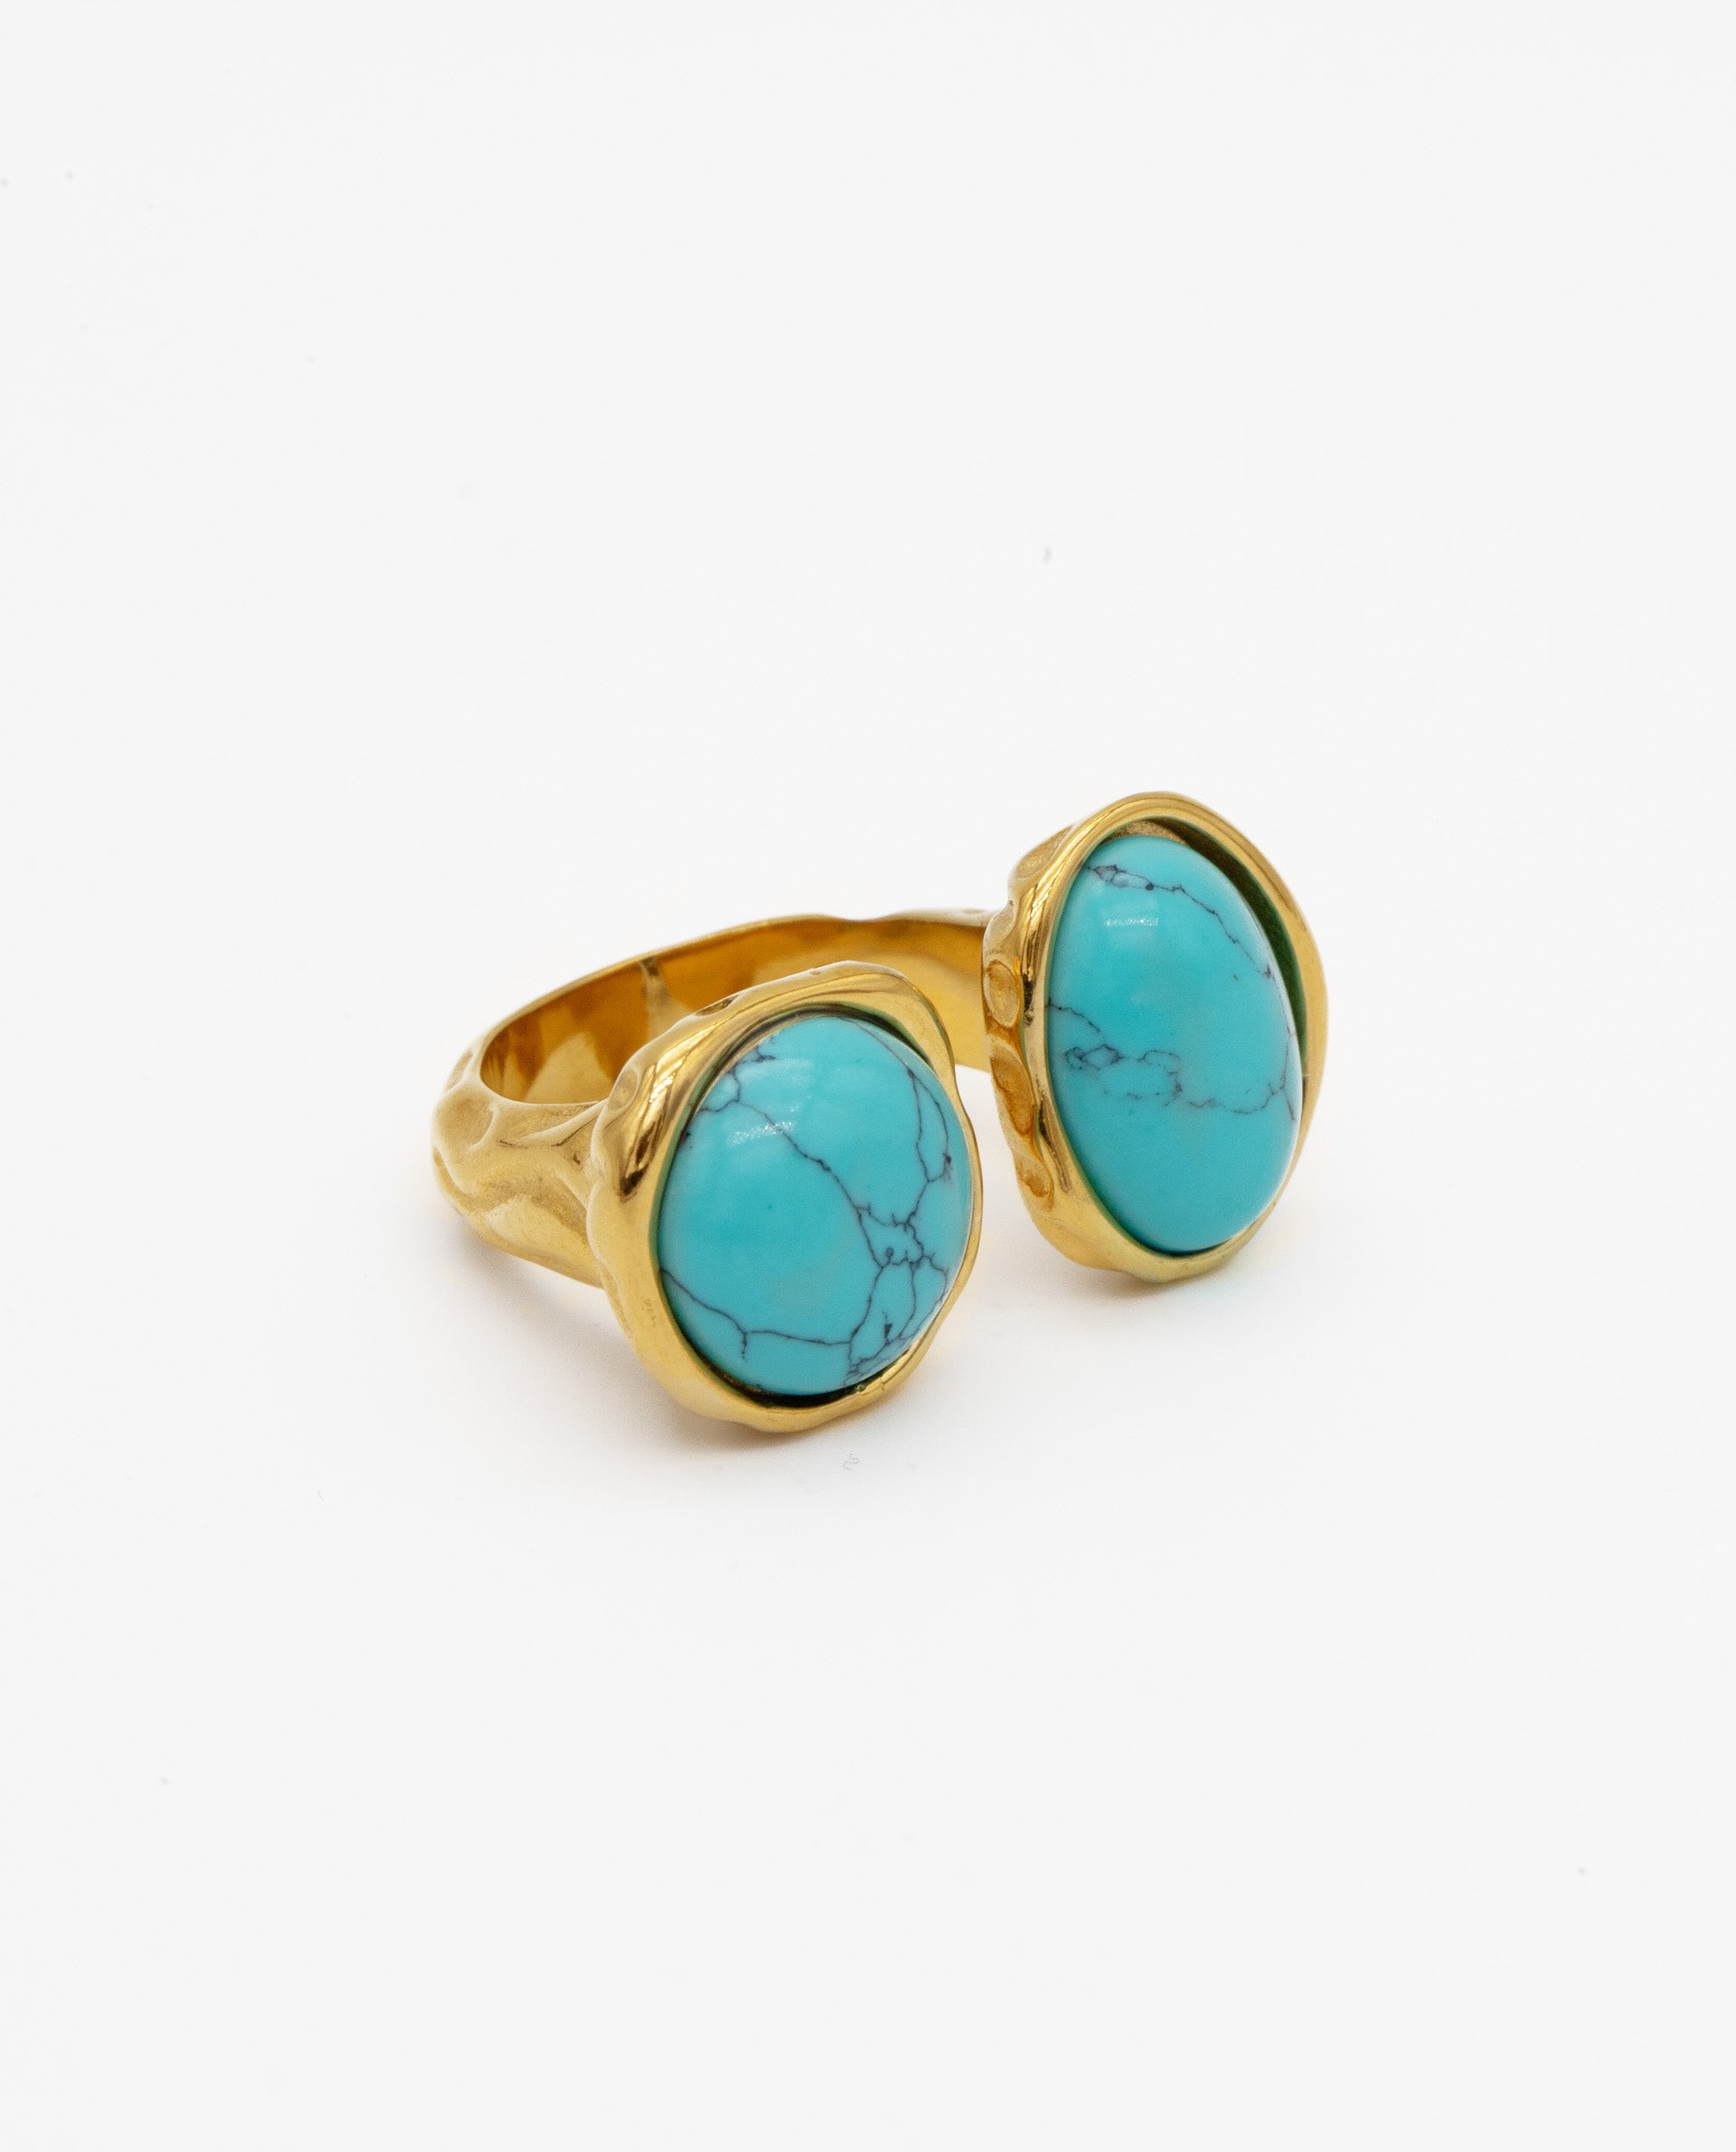 RING DUO TURQUOISE - GOLD PLATED STEEL